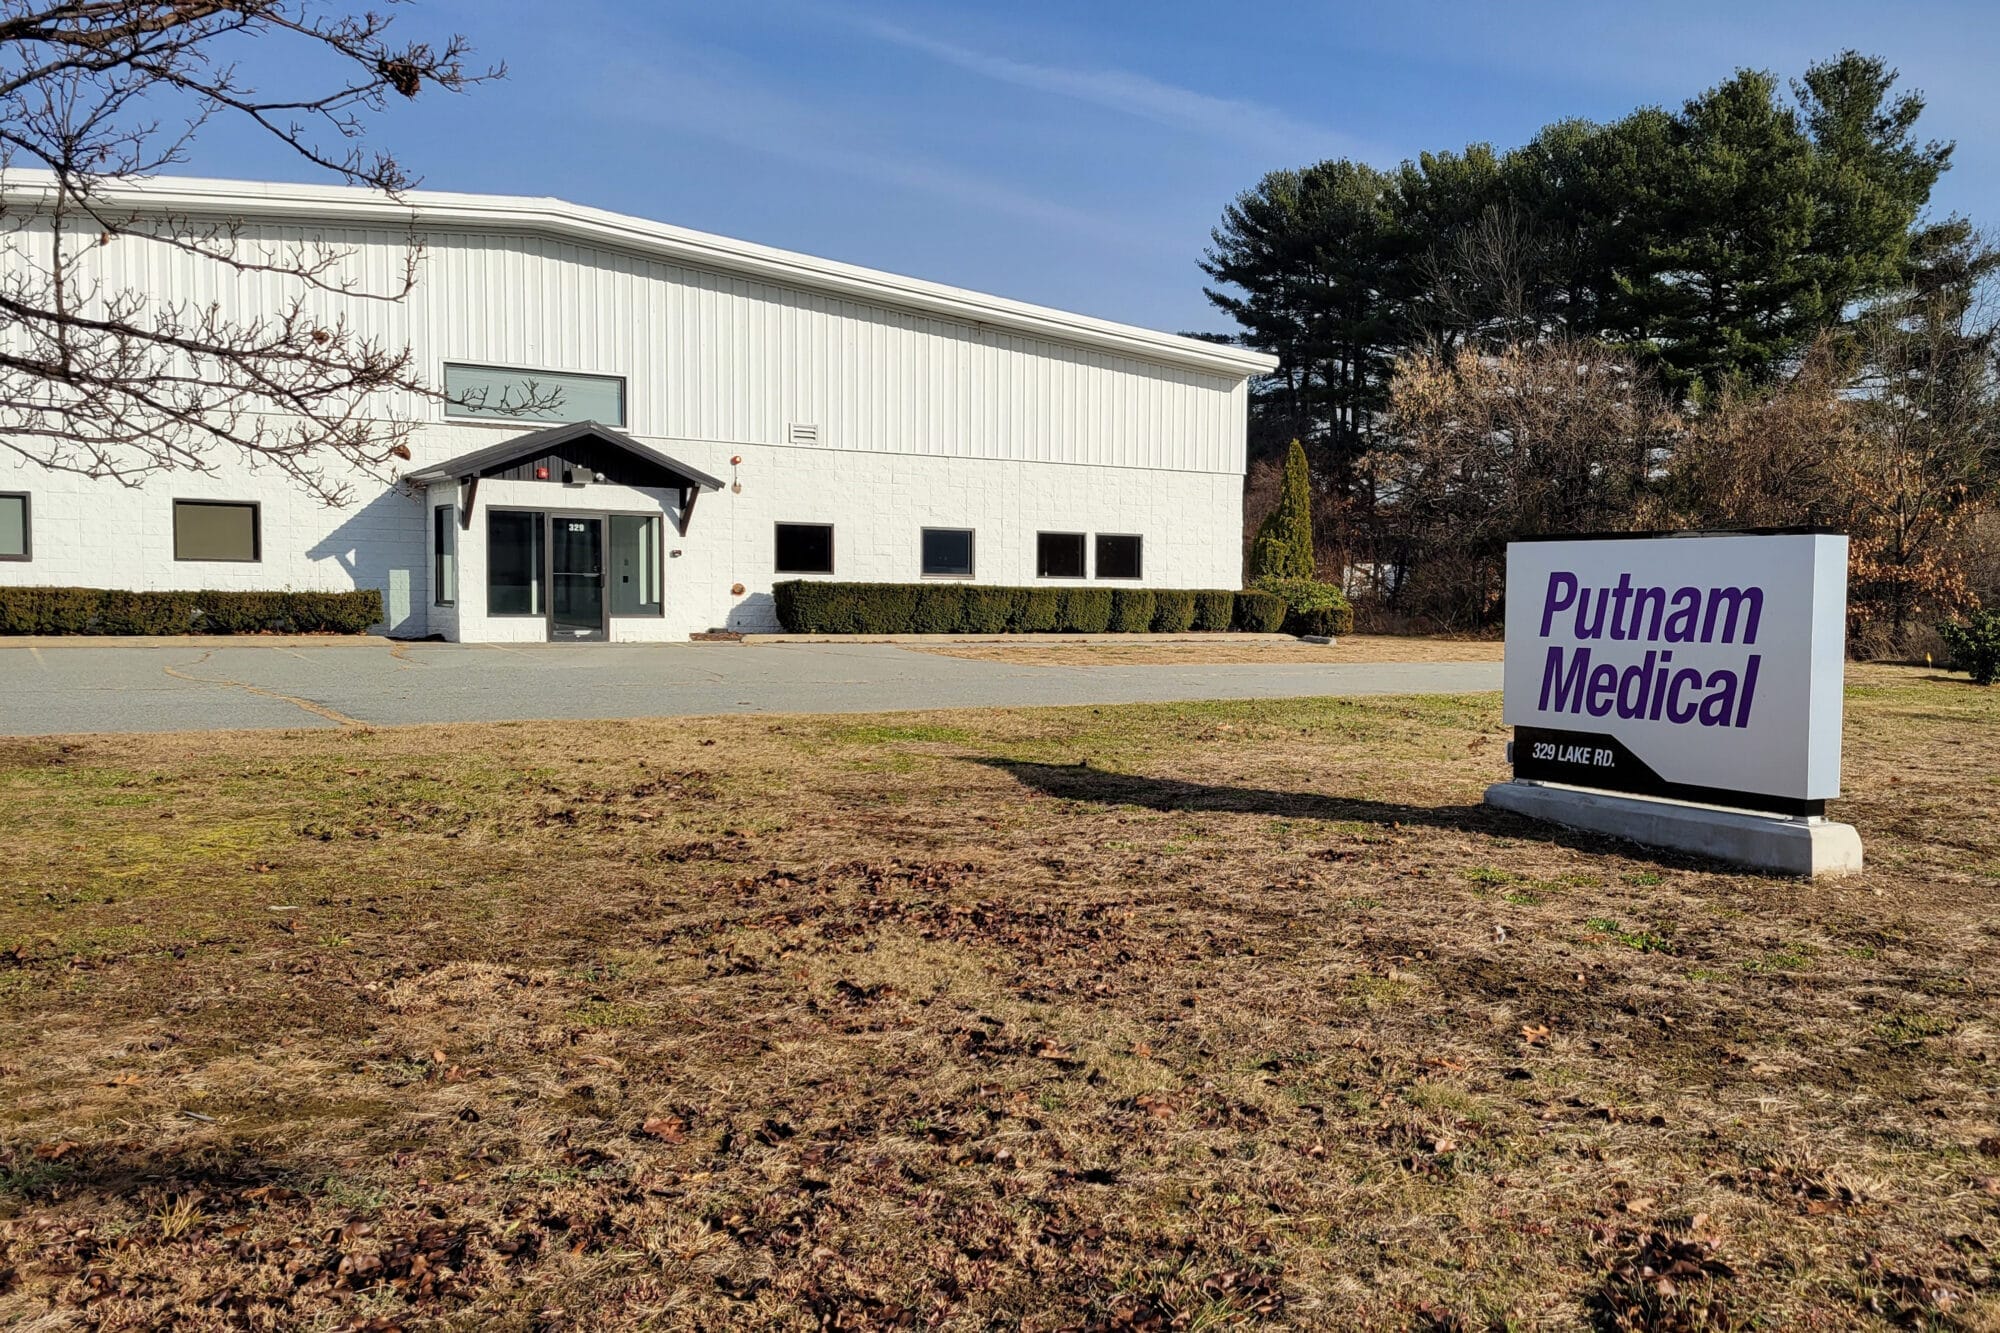 Putnam Medical Corporation located at 329 Lake Road, Dayville, CT